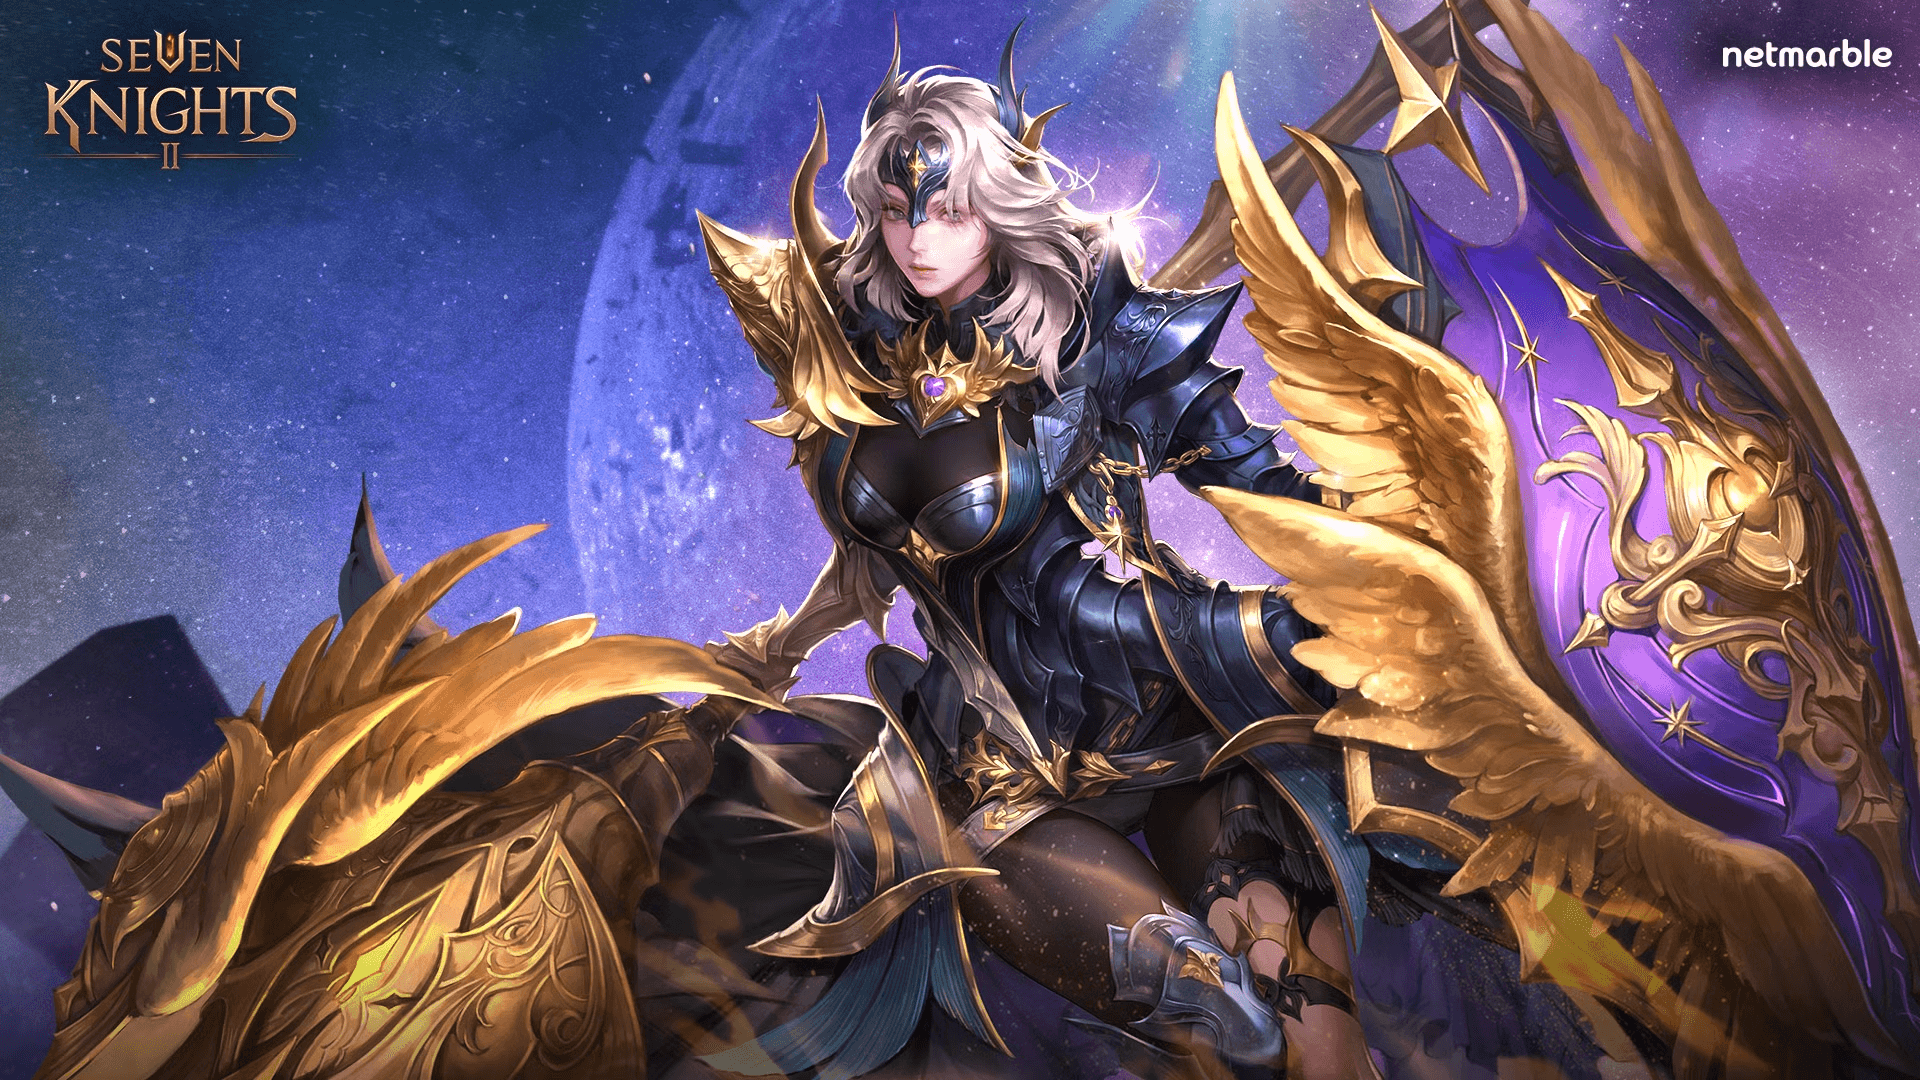 Seven Knights 2 Update Introduces Legendary+ Hero Ophelia and More